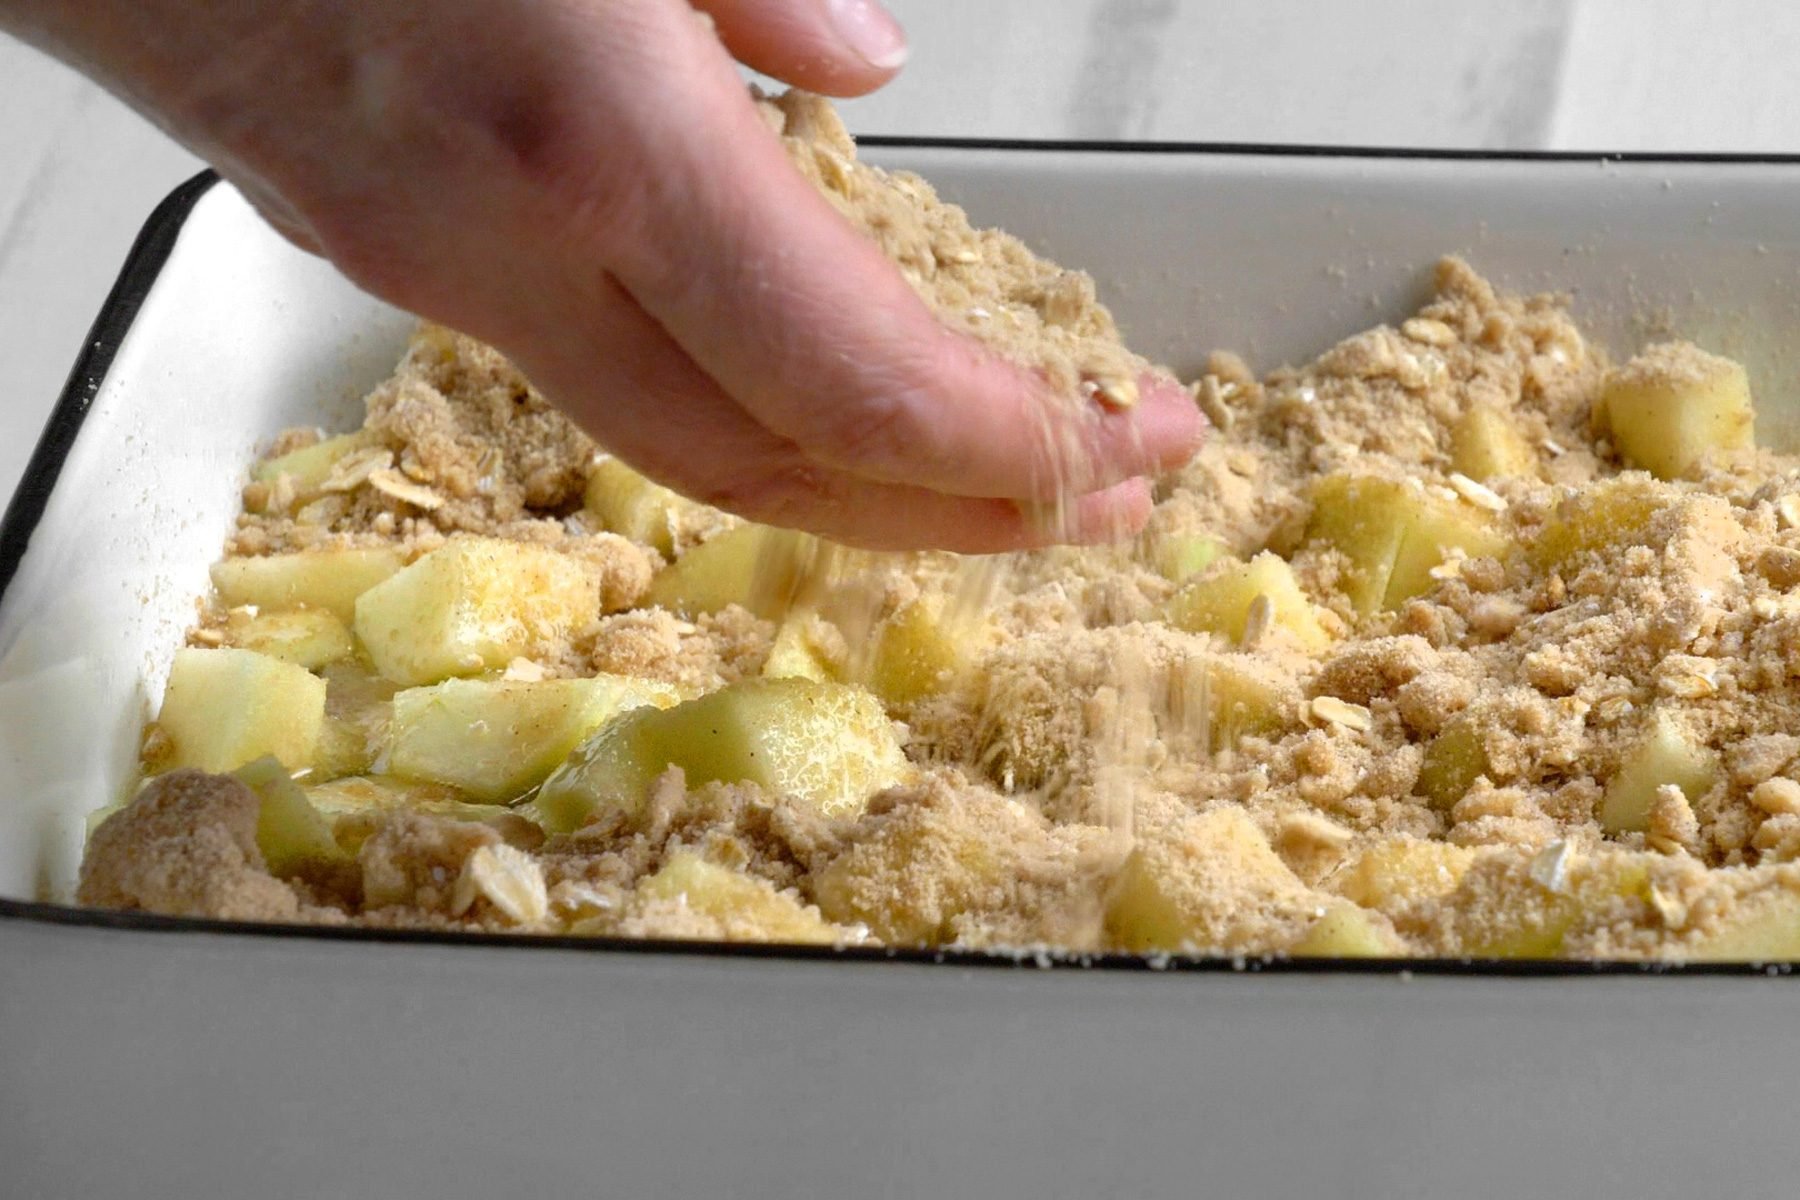 A hand sprinkles the crumb mixture over the layer of chopped apples in a baking dish.